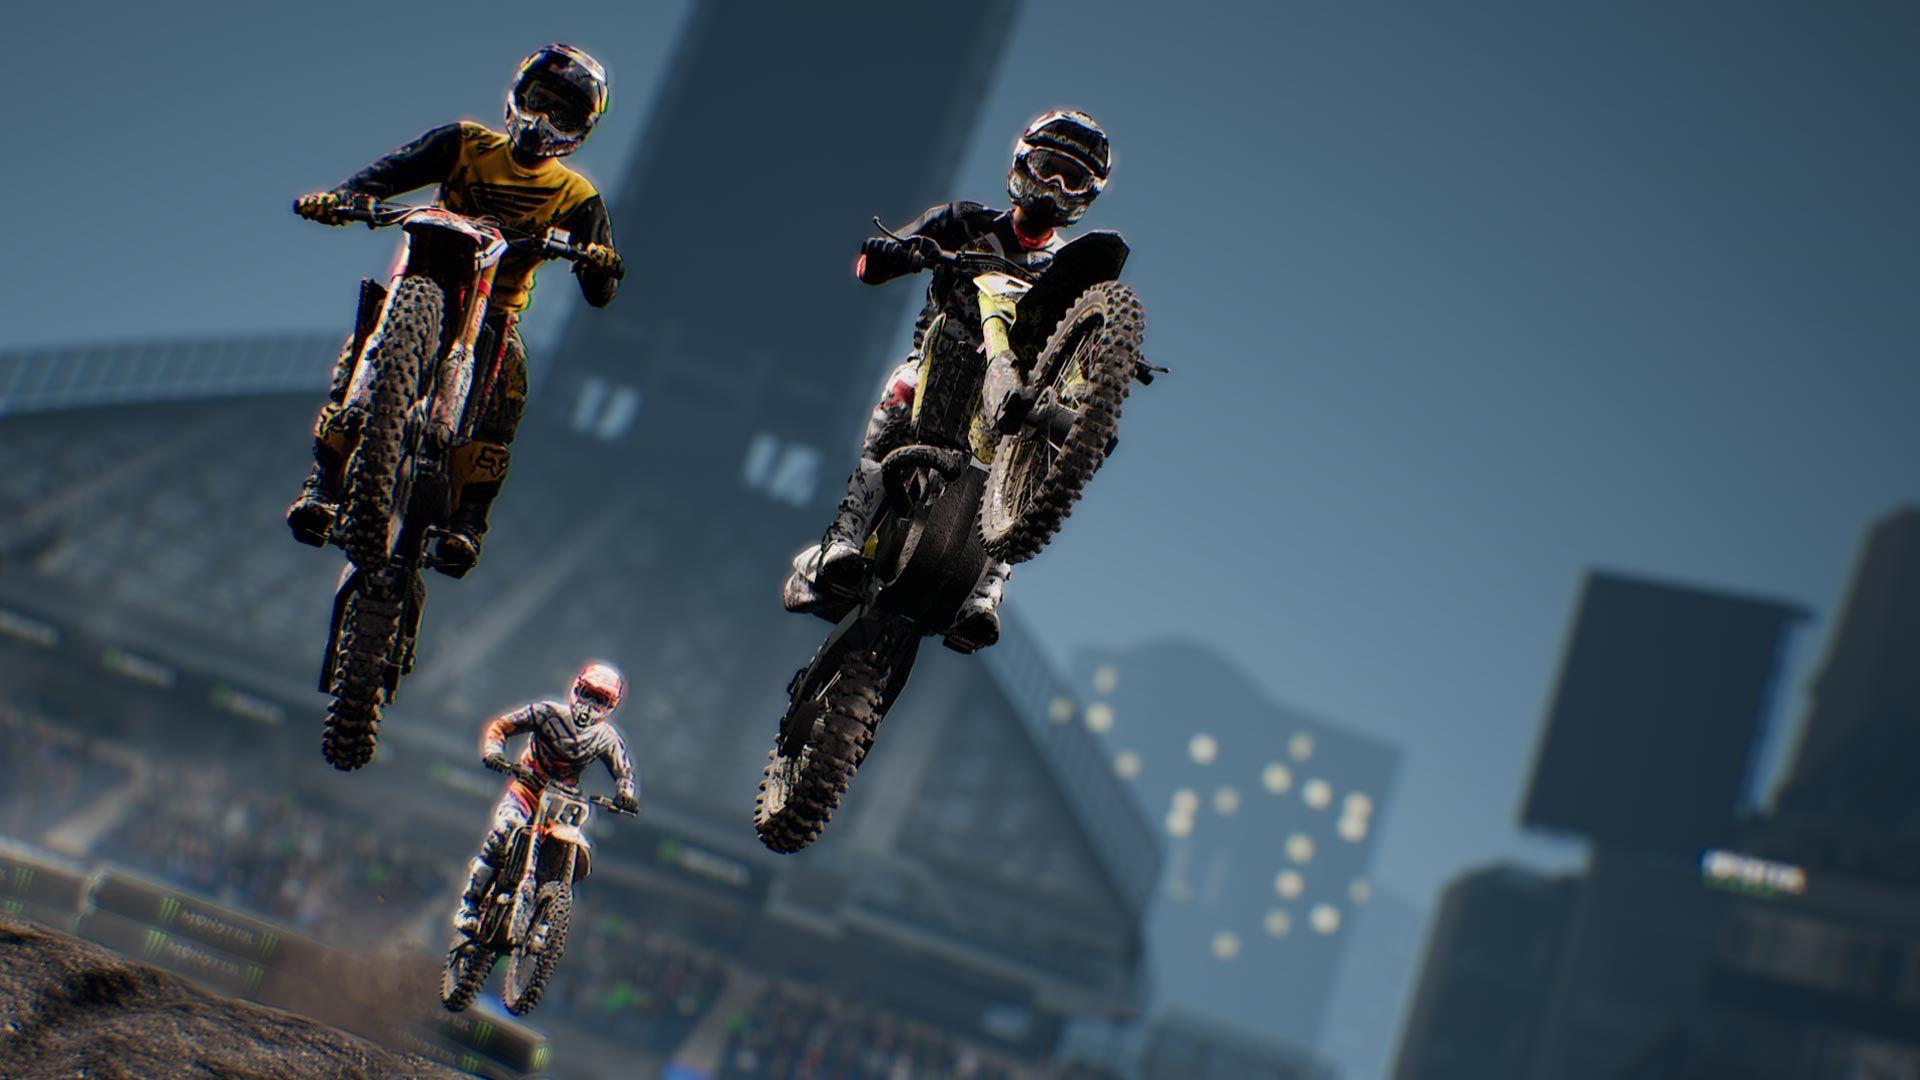 Monster Energy Supercross Official Videogame on PS4. Official